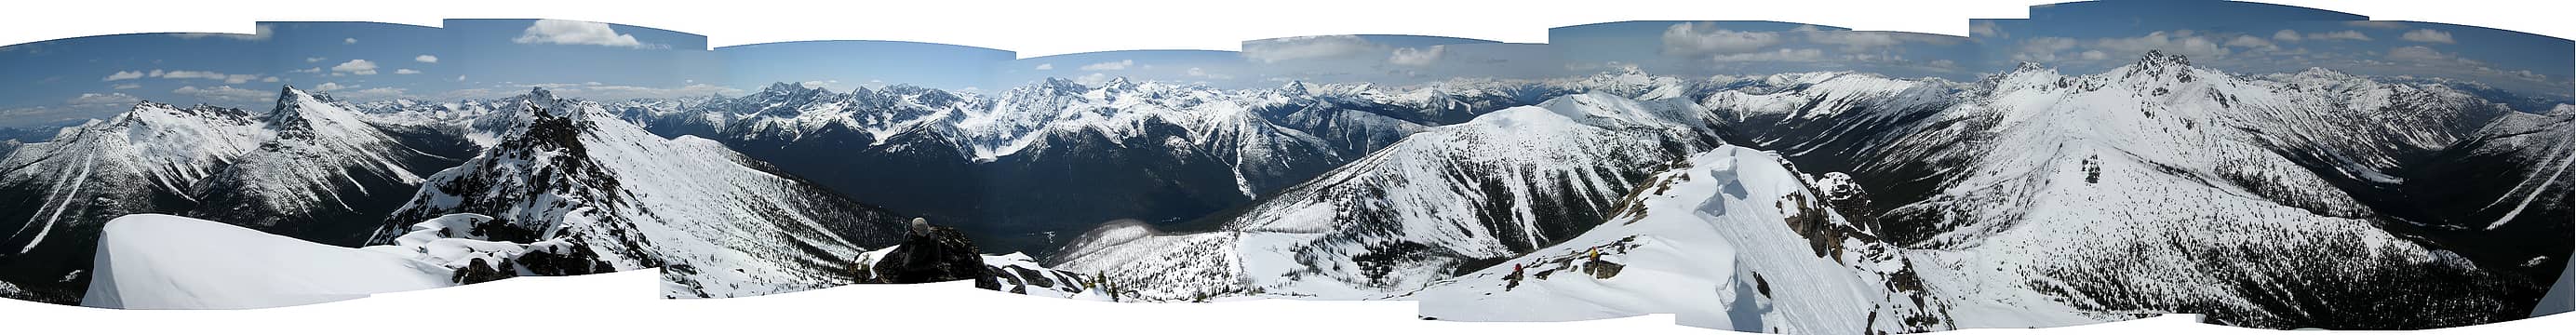 360 degree pan from Methow Pinnacles.  Previous pan is the center third of this pan.  (labeled)